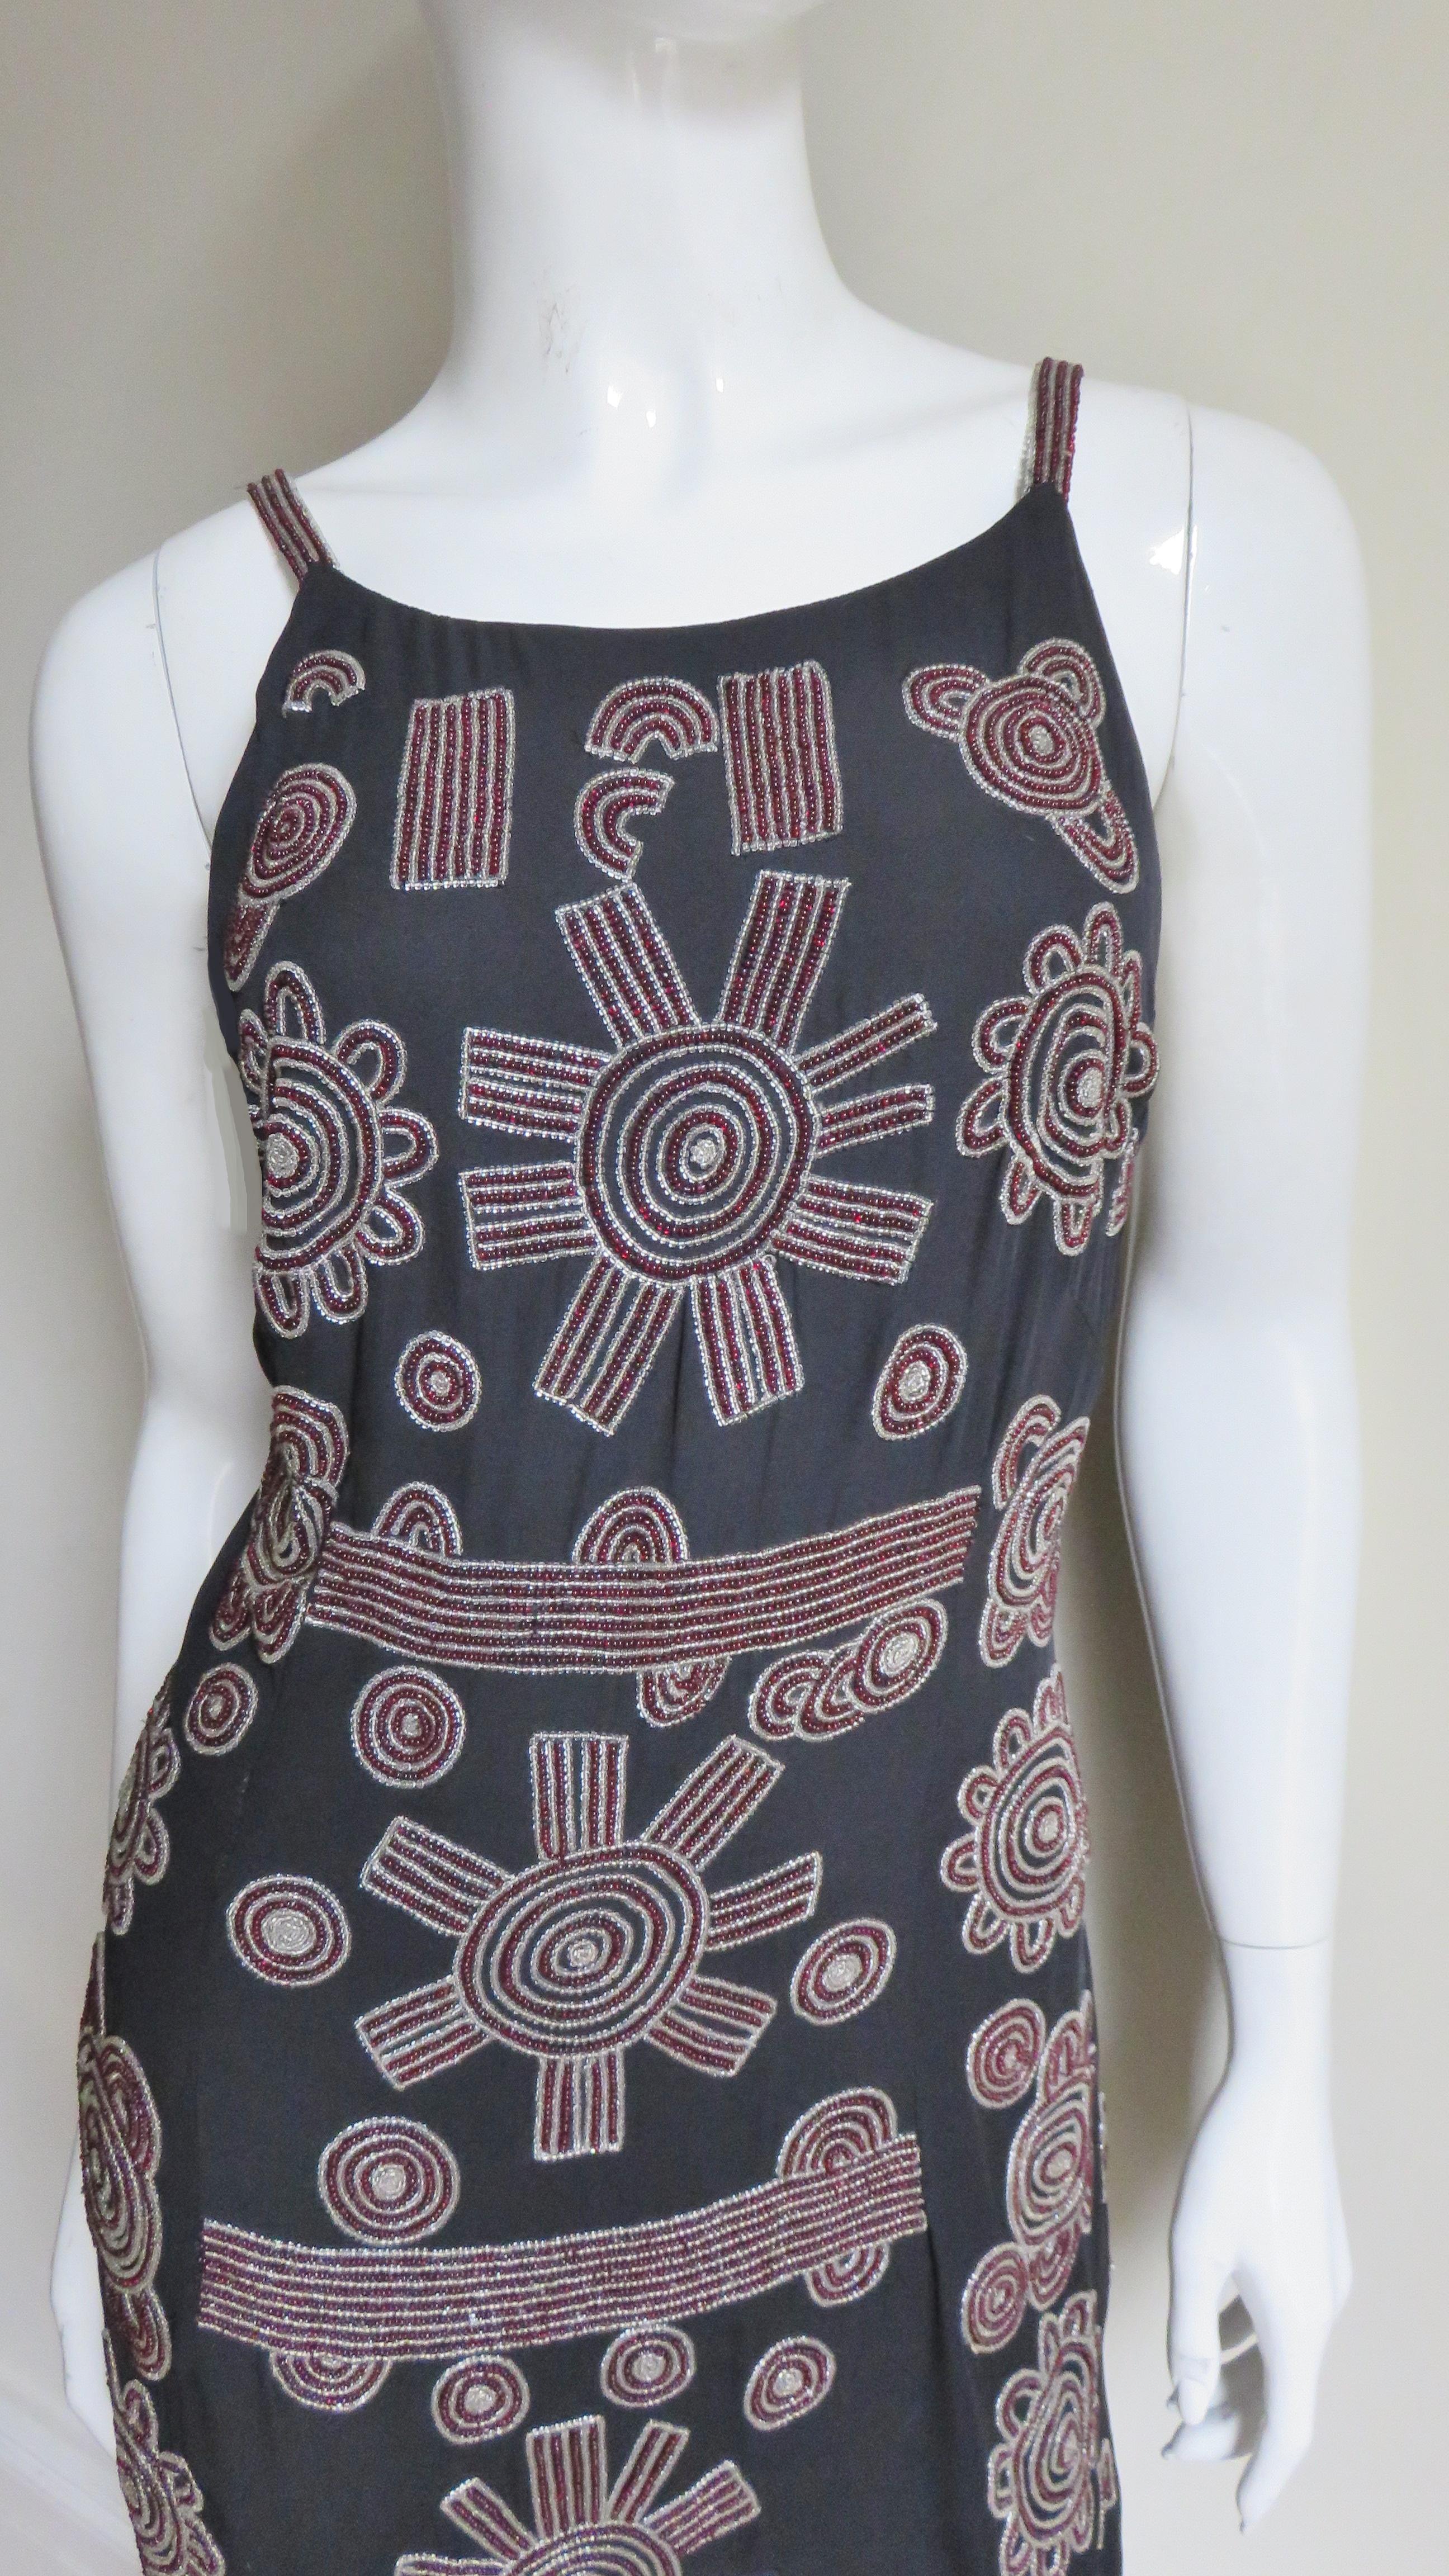  Karl Lagerfeld Beaded Silk Dress 1990s In Good Condition For Sale In Water Mill, NY